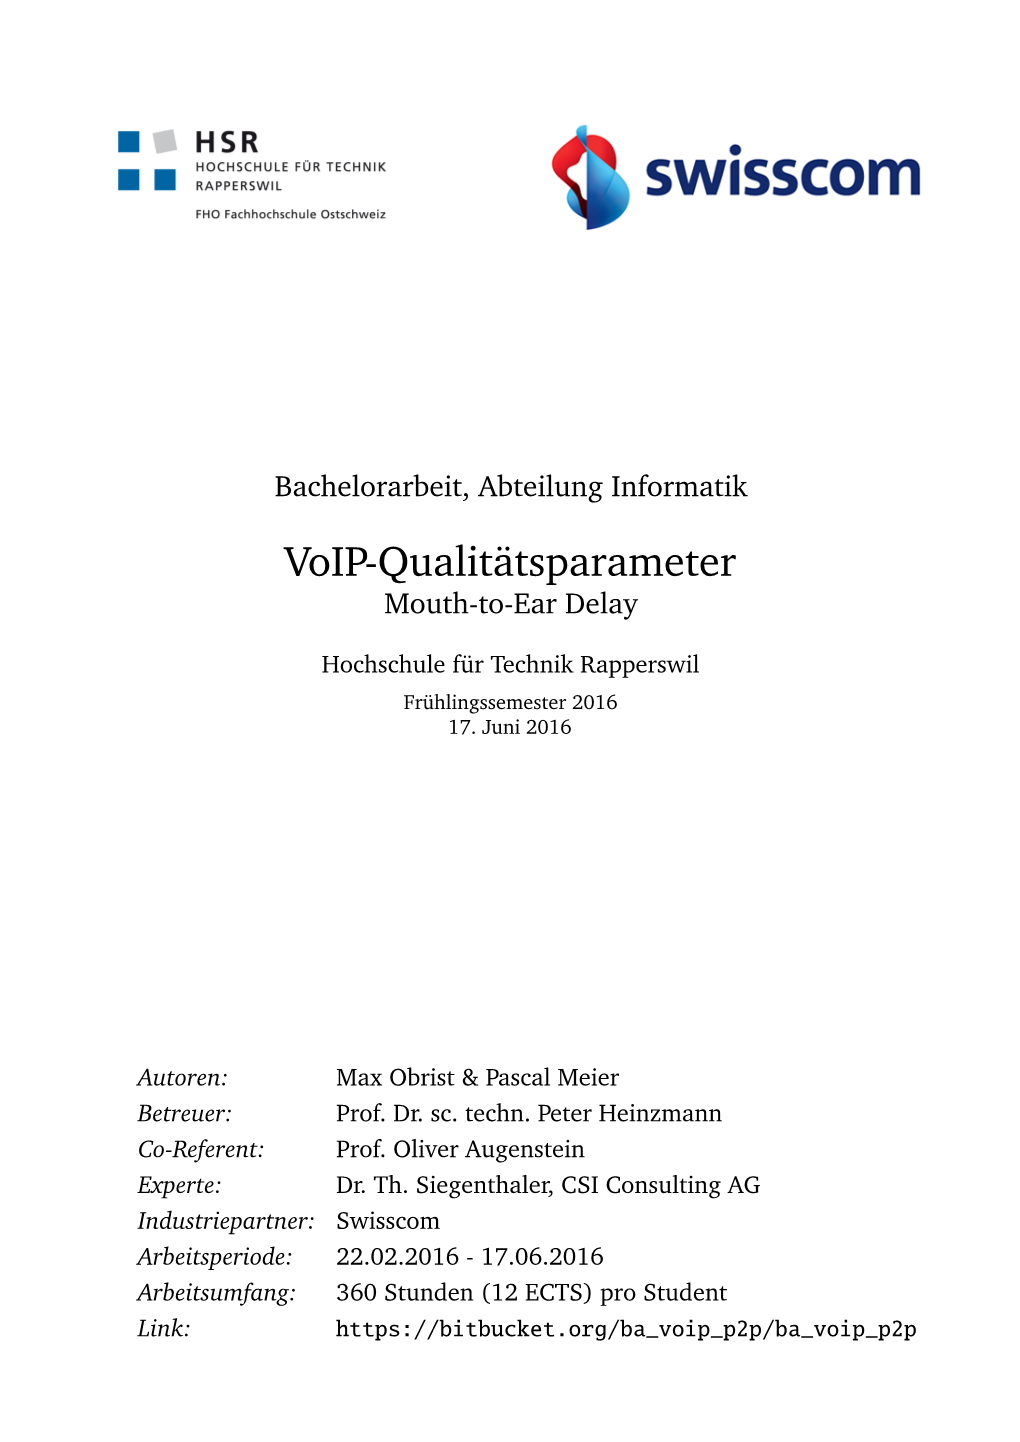 Voip-Qualitätsparameter Mouth-To-Ear Delay